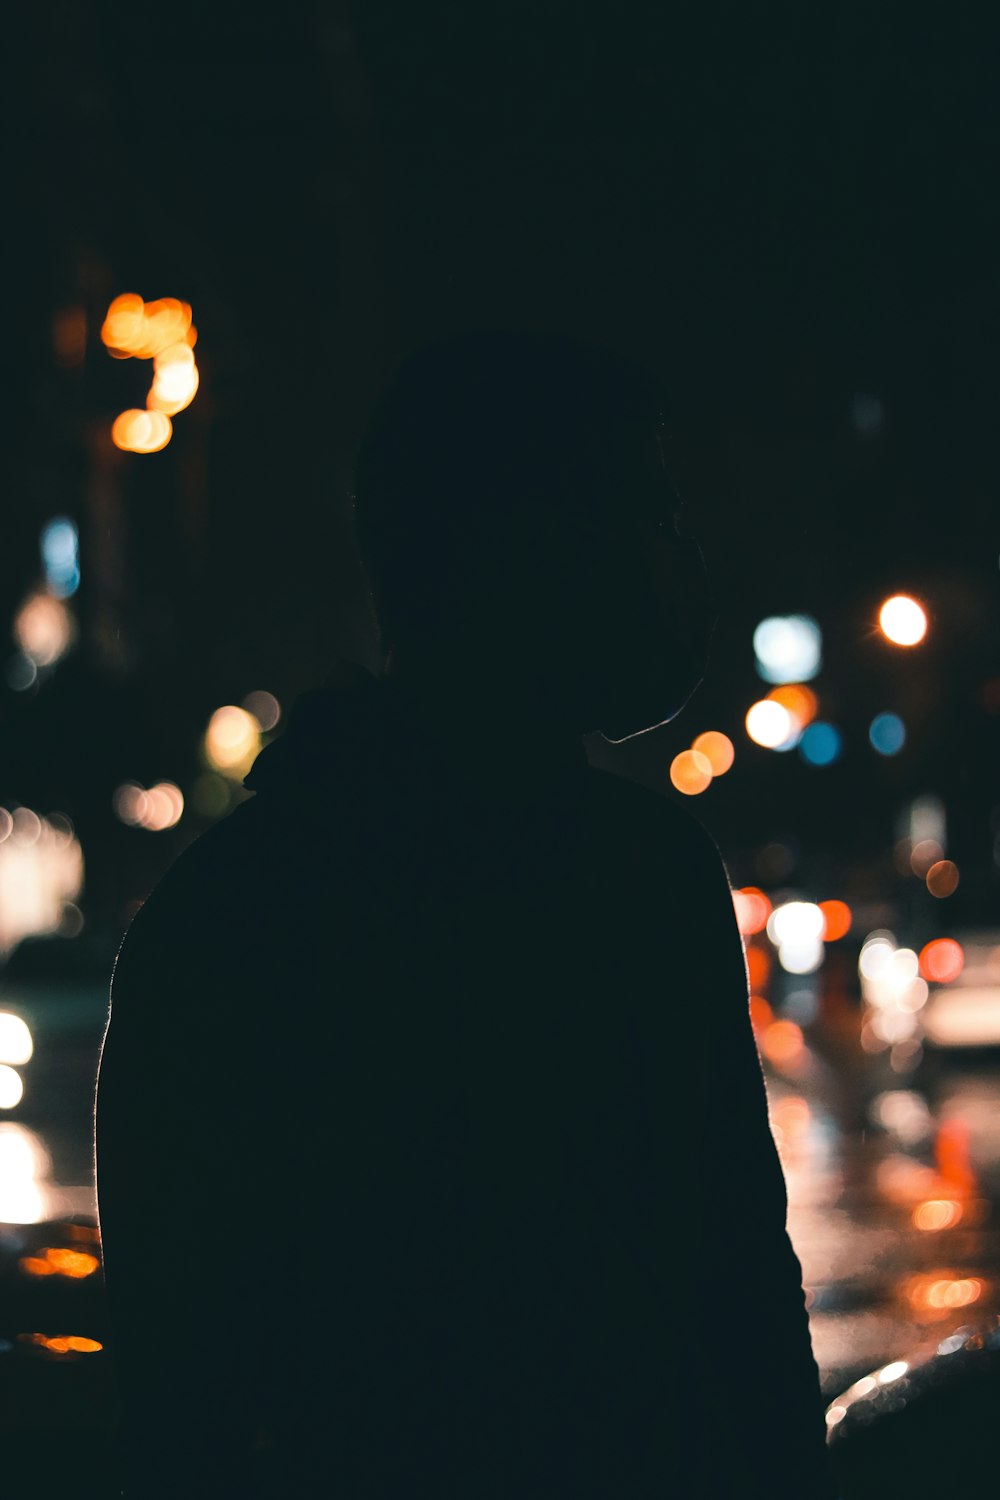 a person standing on a street at night